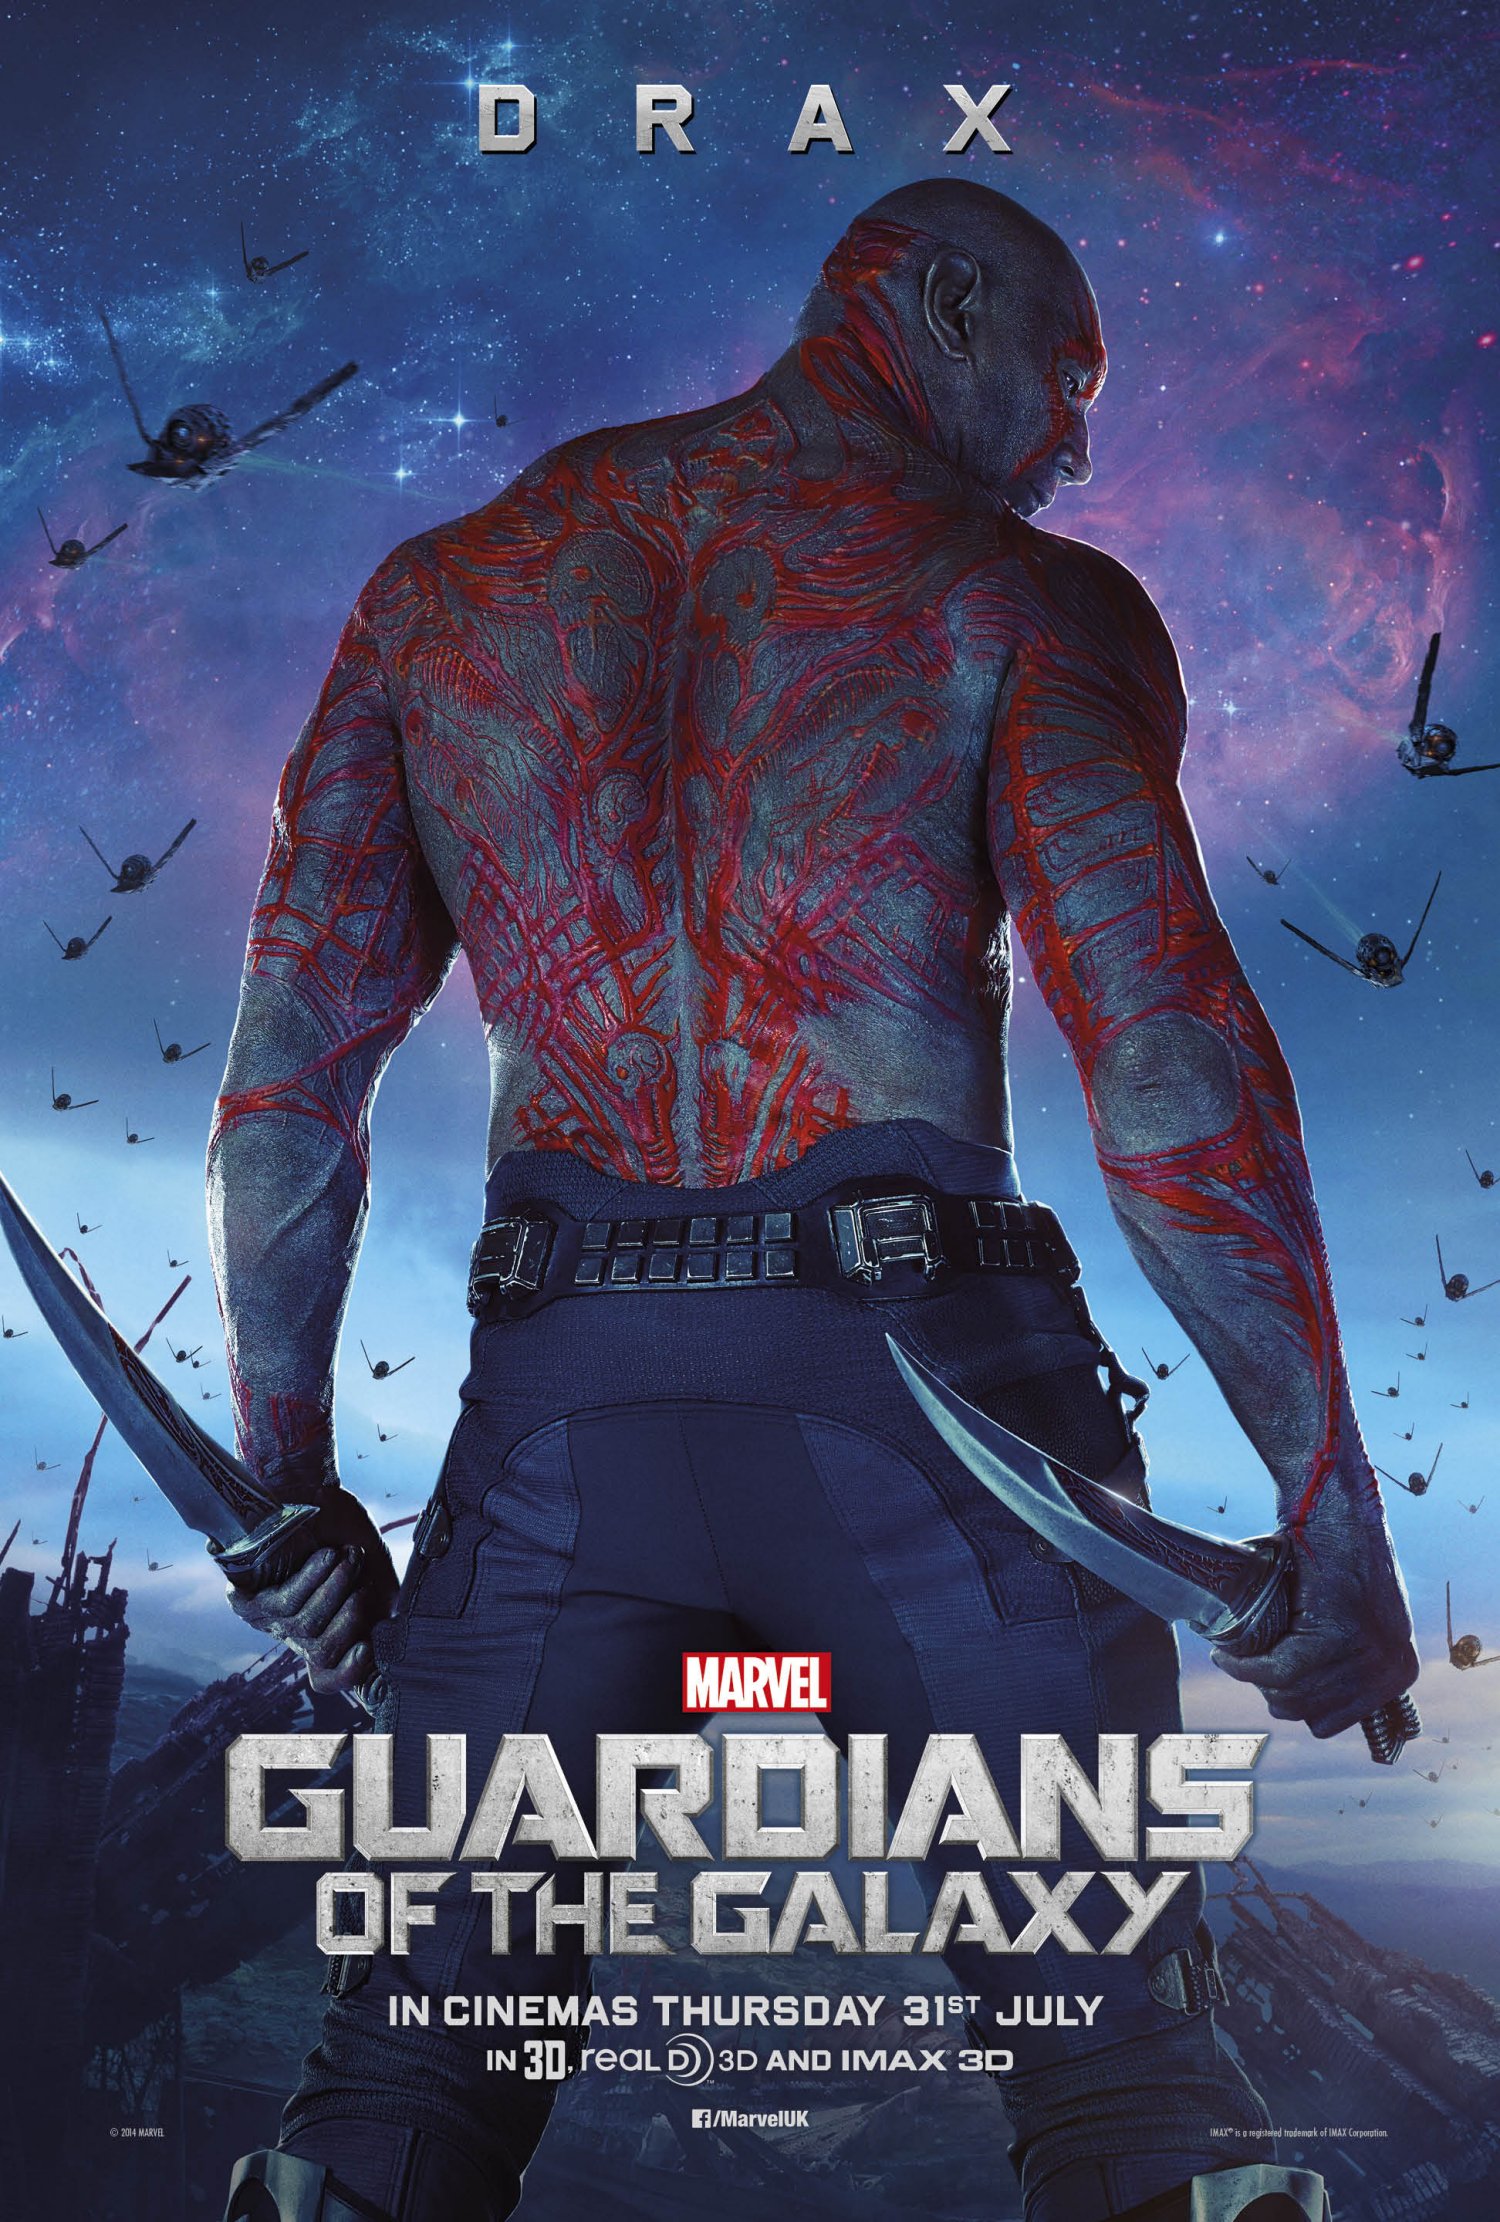 Guardians of the Galaxy – Drax poster